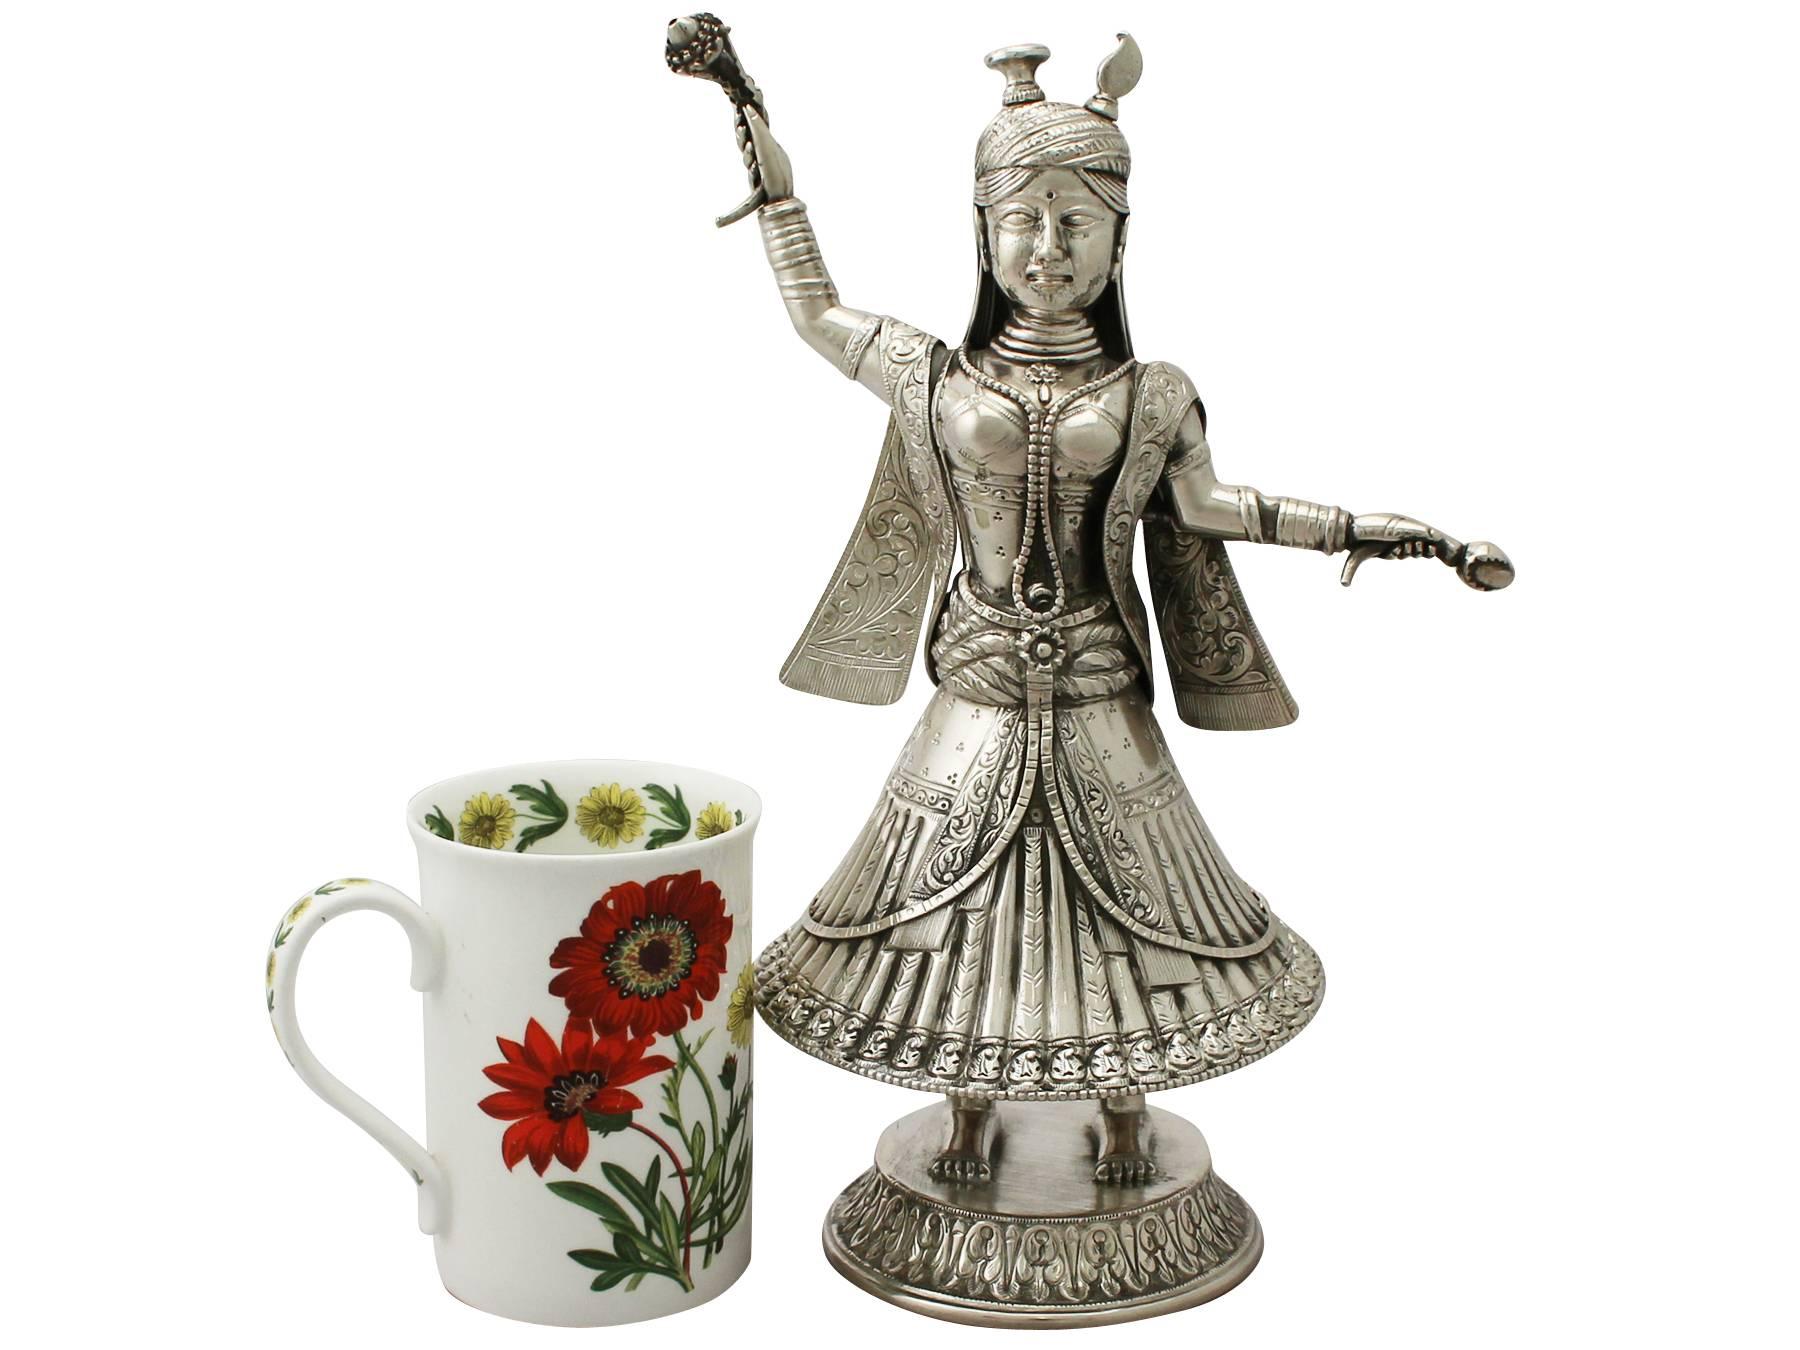 An exceptional, fine and impressive antique Indian 900 standard silver rosewater sprinkler modelled in the form of a dancer; an addition to our diverse ornamental silverware collection

This exceptional antique Indian silver rosewater sprinkler